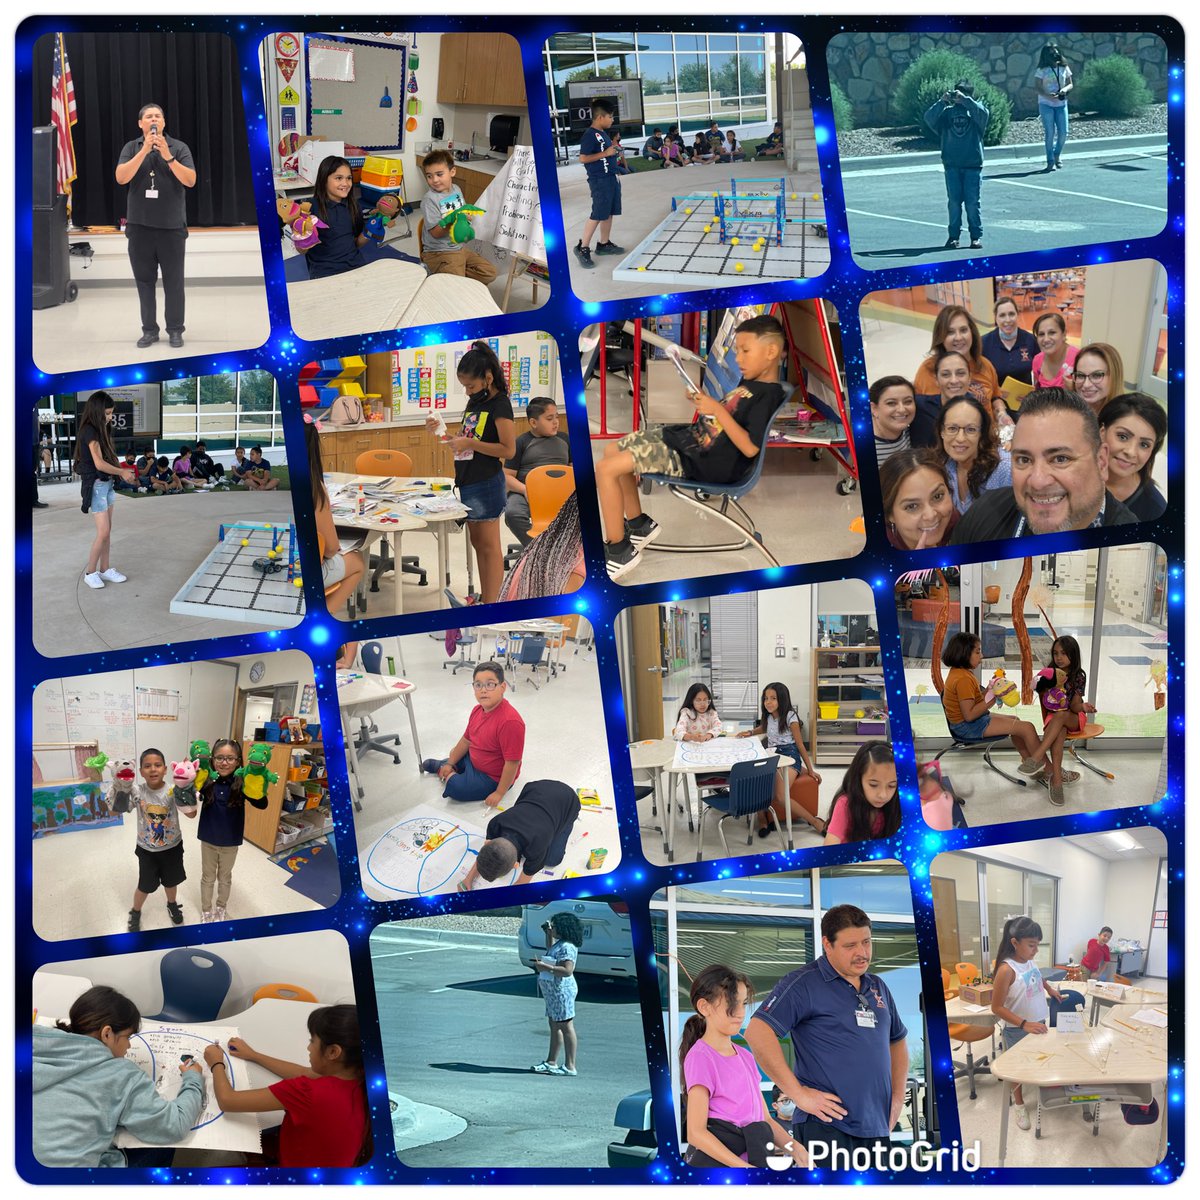 Summer School 2022 is in the books! We had two fun-filled weeks of learning and collaborating with our Riverside Learning Community VIPs. Thank you to everyone who made this possible. @Mbelle143 @LauraBurdett3 @RamonaESYISD